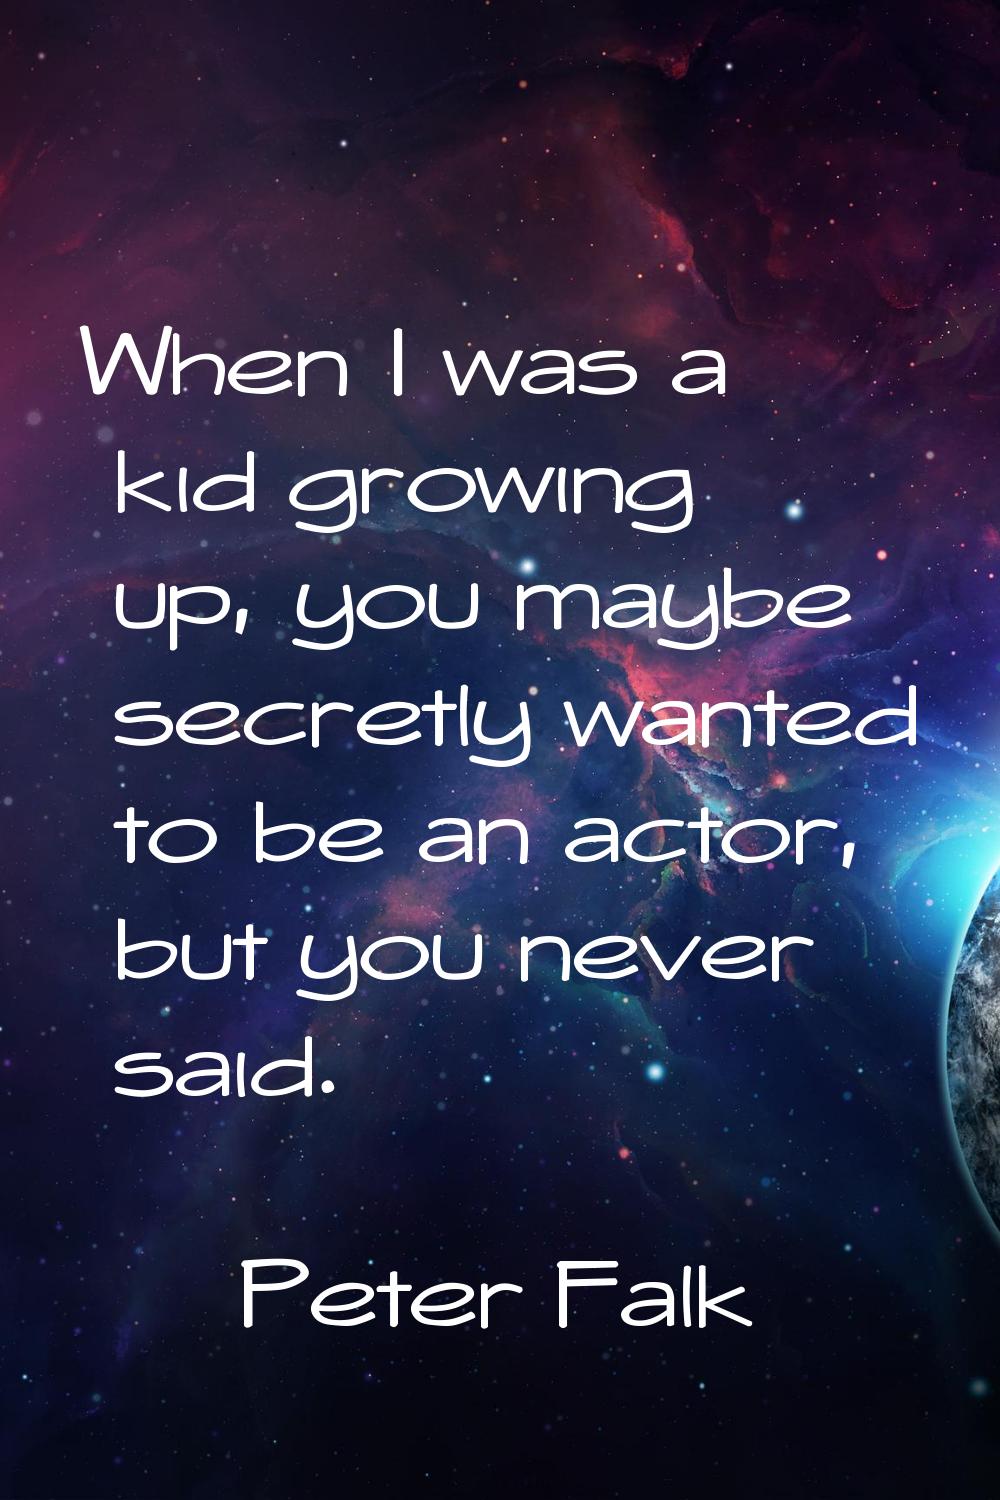 When I was a kid growing up, you maybe secretly wanted to be an actor, but you never said.